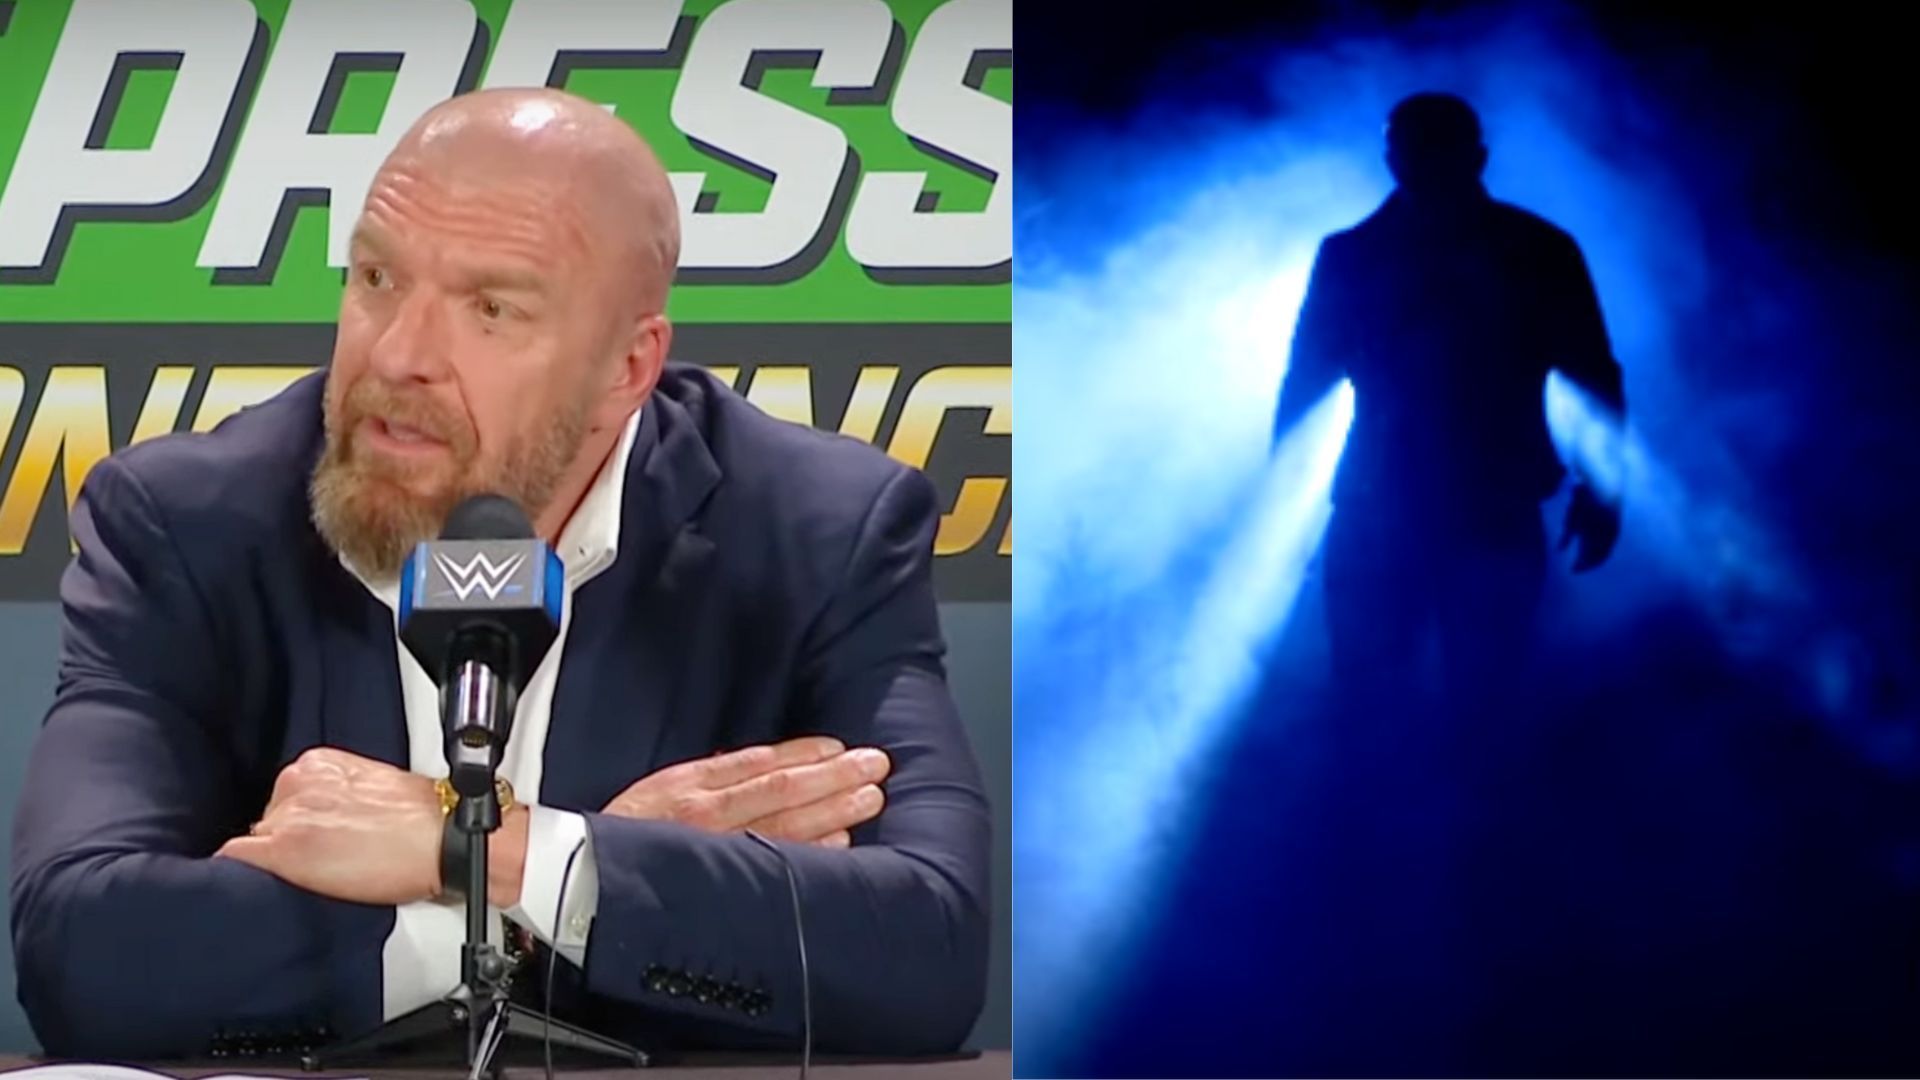 Triple H spoke following the Money in the Bank premium live event.